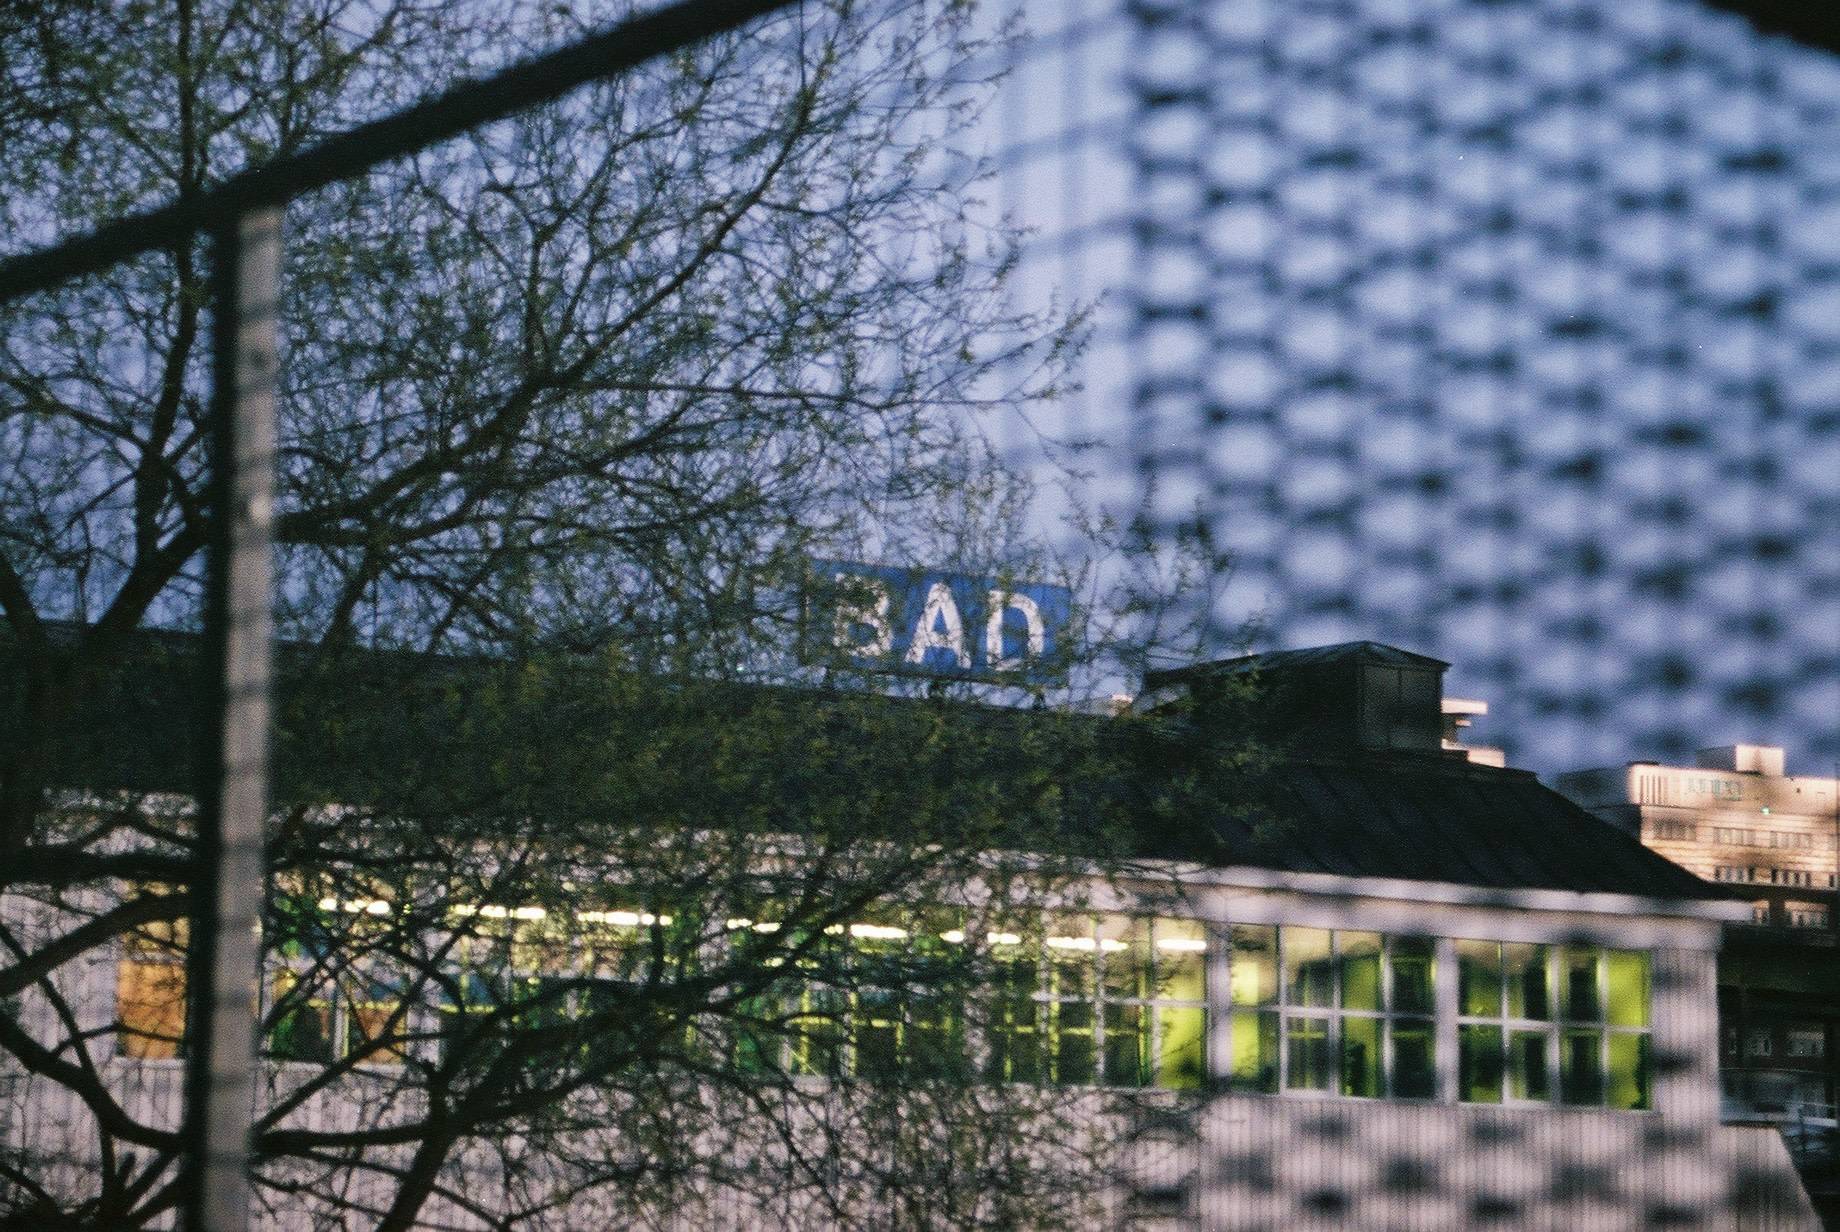 building seen through metal woven fence, where the sign on the building reads 'bad'